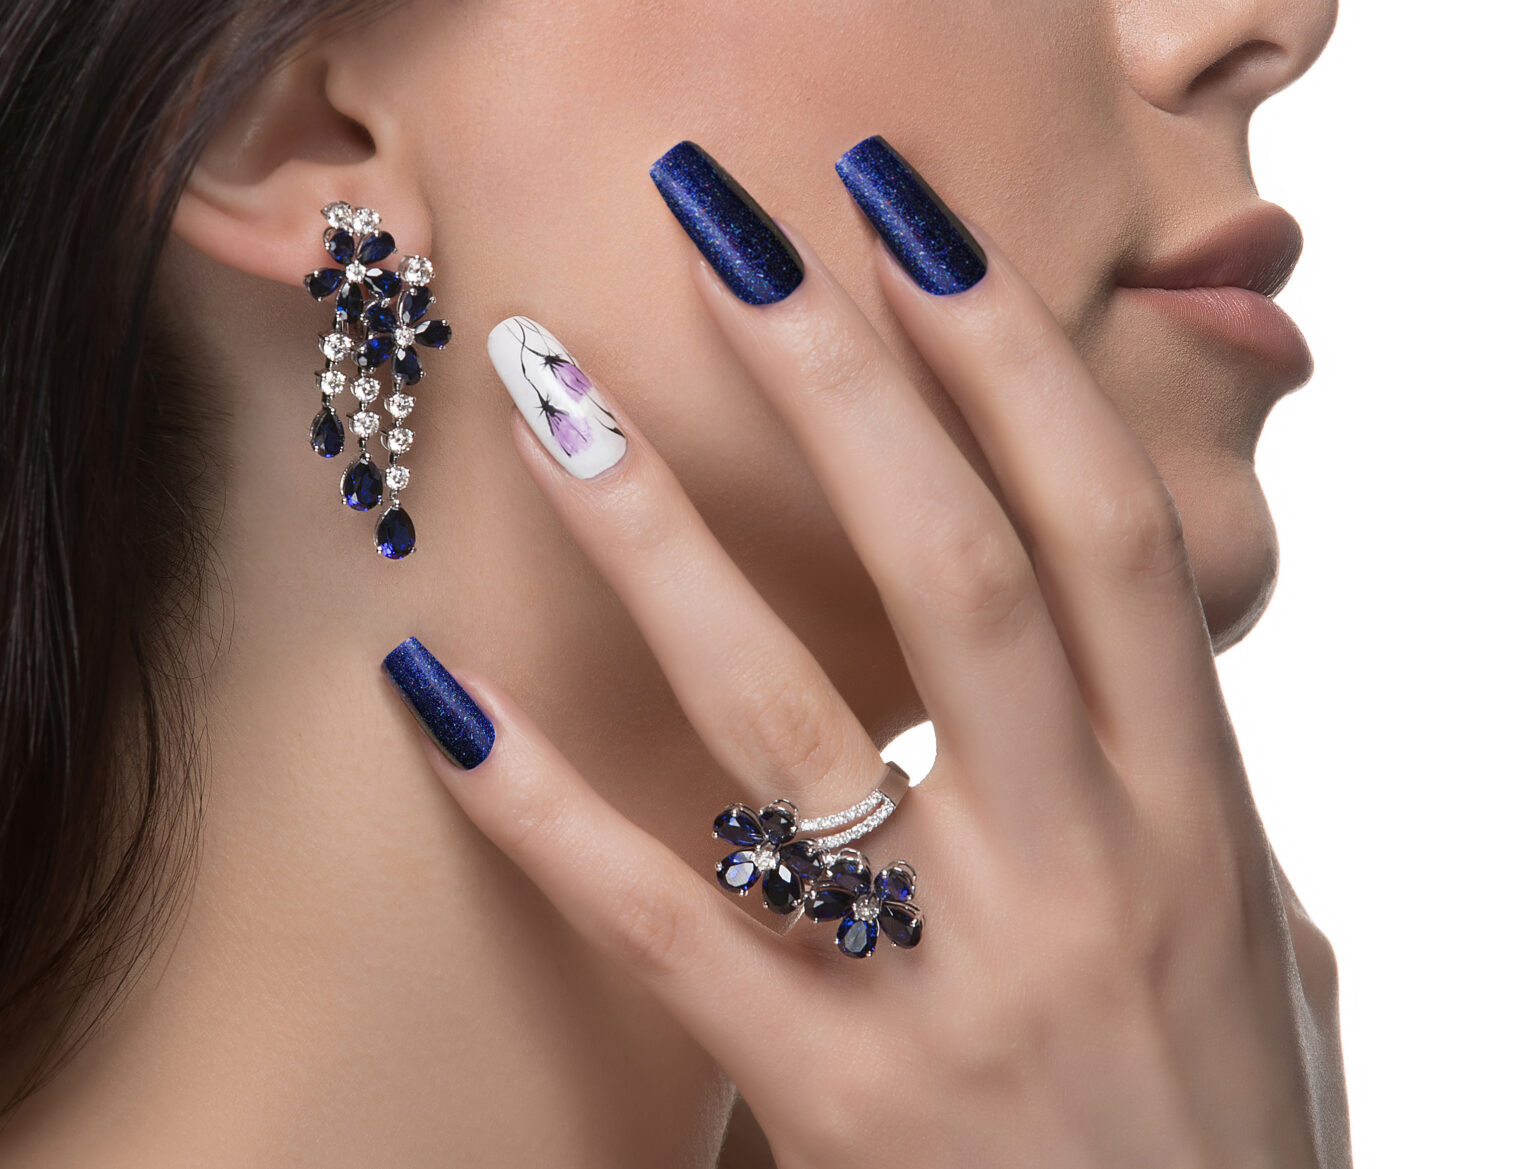 Top 5 Unique & Stylish Nail Trends To Try in 2021